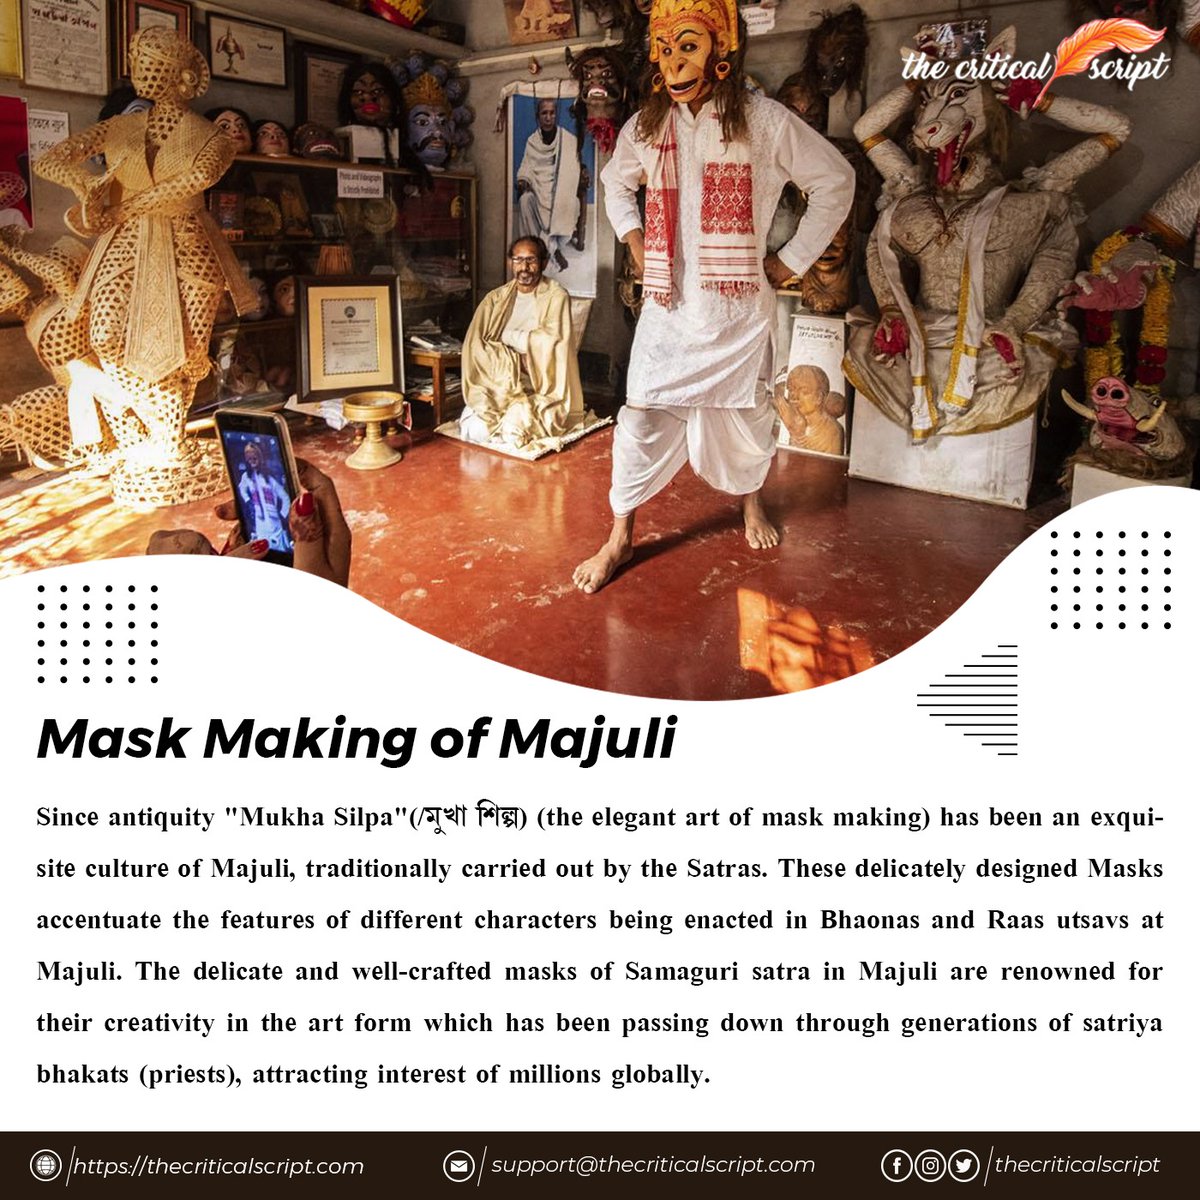 This historic tradition of mask-making in the Sattras of Majuli reflects an artful means of interaction through performance. Know here.

#Assam #majuli #maskmaking 
@mygovassam @MDoNER_India @MinOfCultureGoI